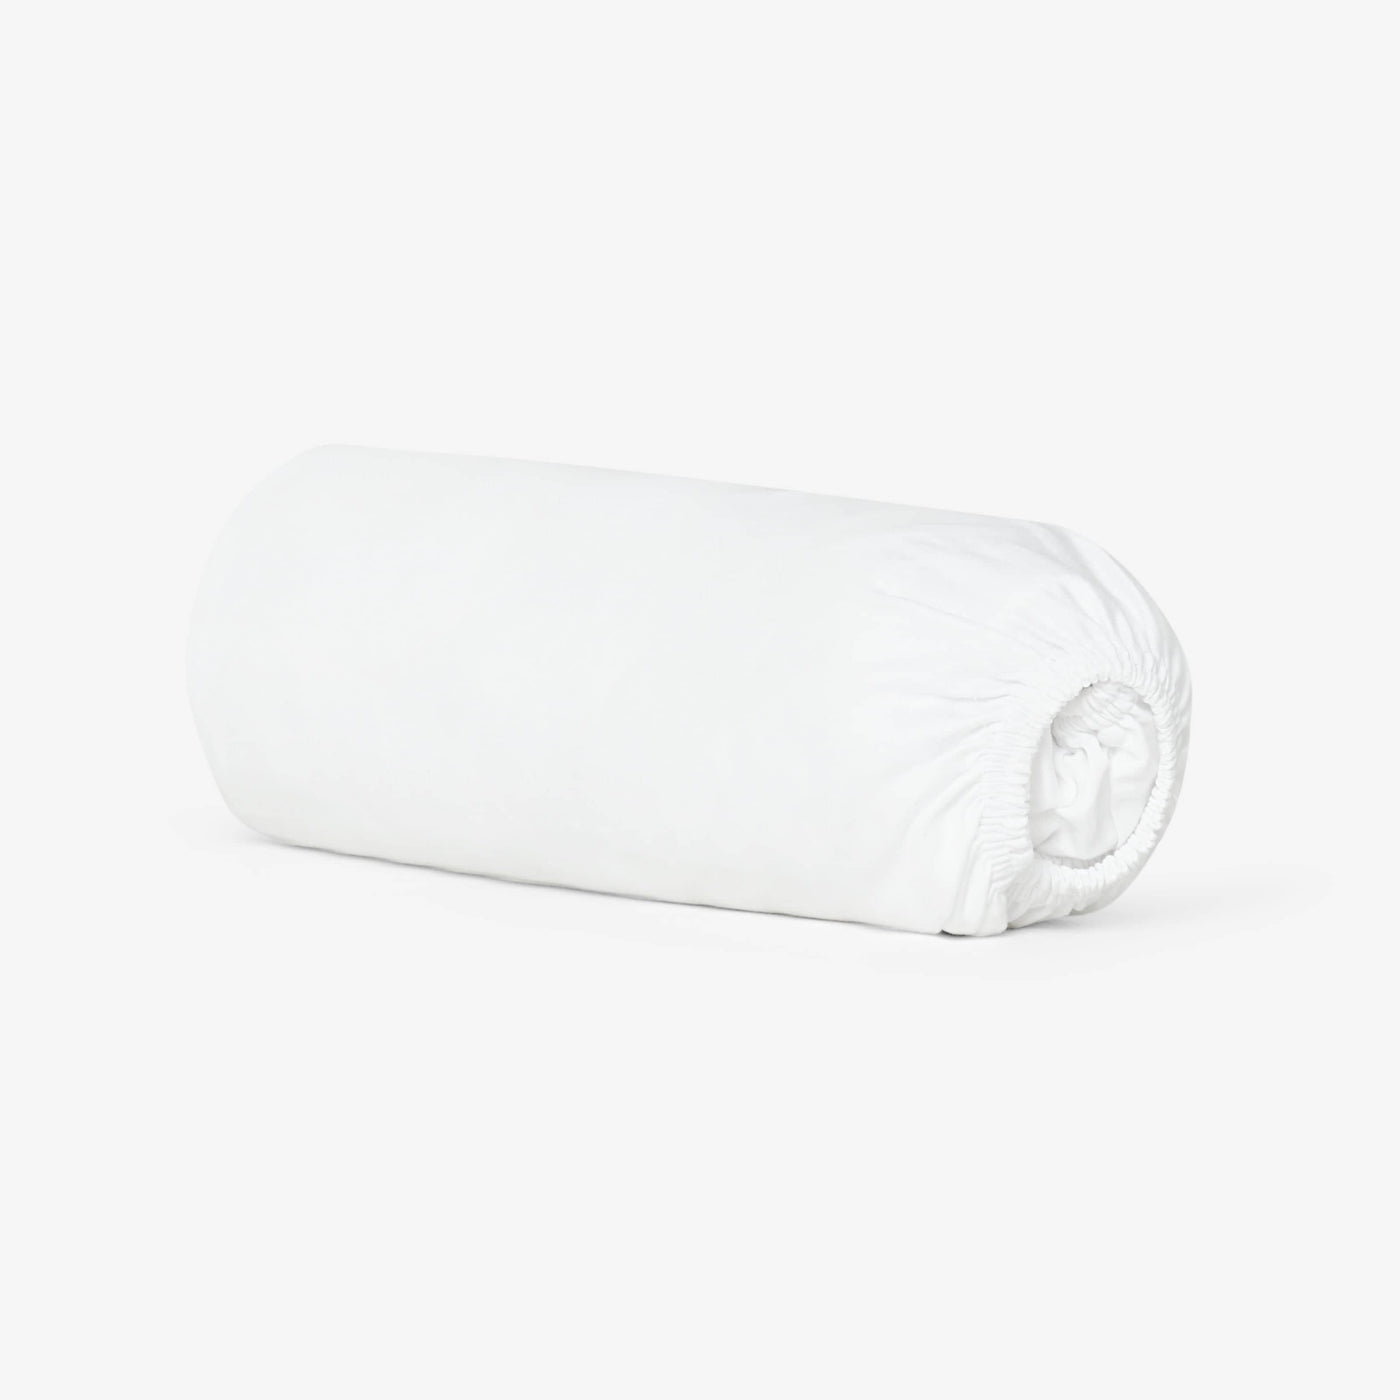 Darcy 100% Turkish Cotton 210 TC Fitted Sheet, White, Double Size Bed Sheets sazy.com